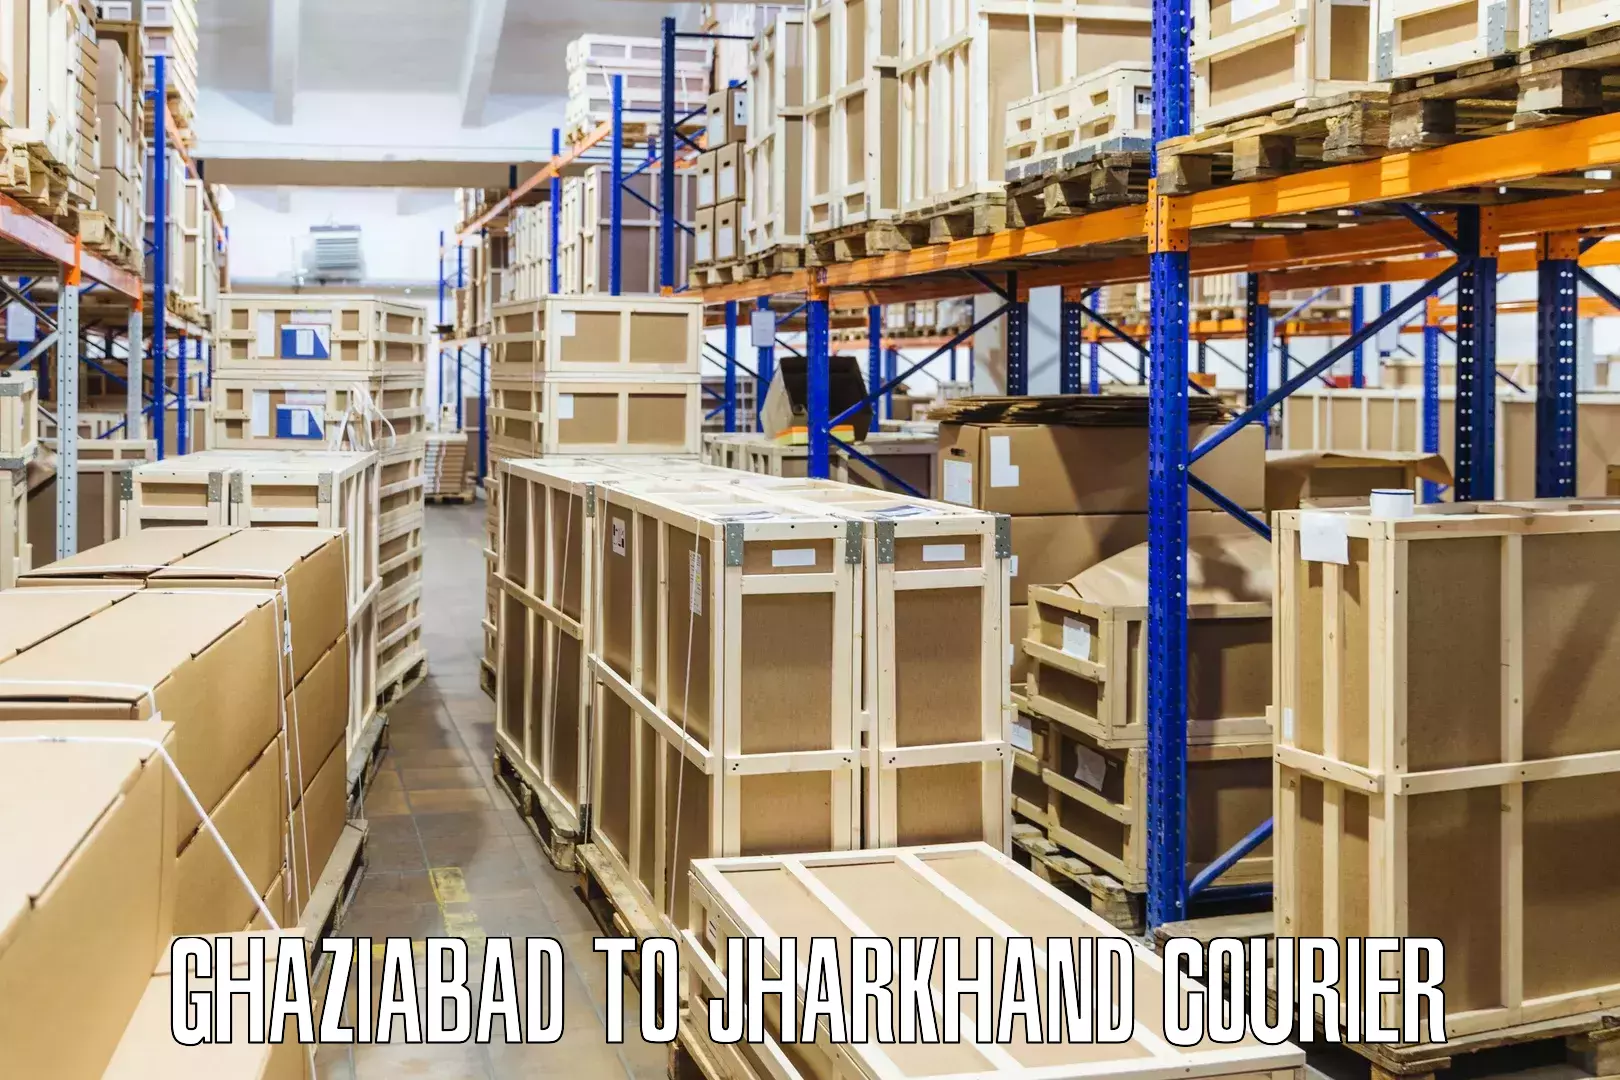 Courier service booking Ghaziabad to Ranchi